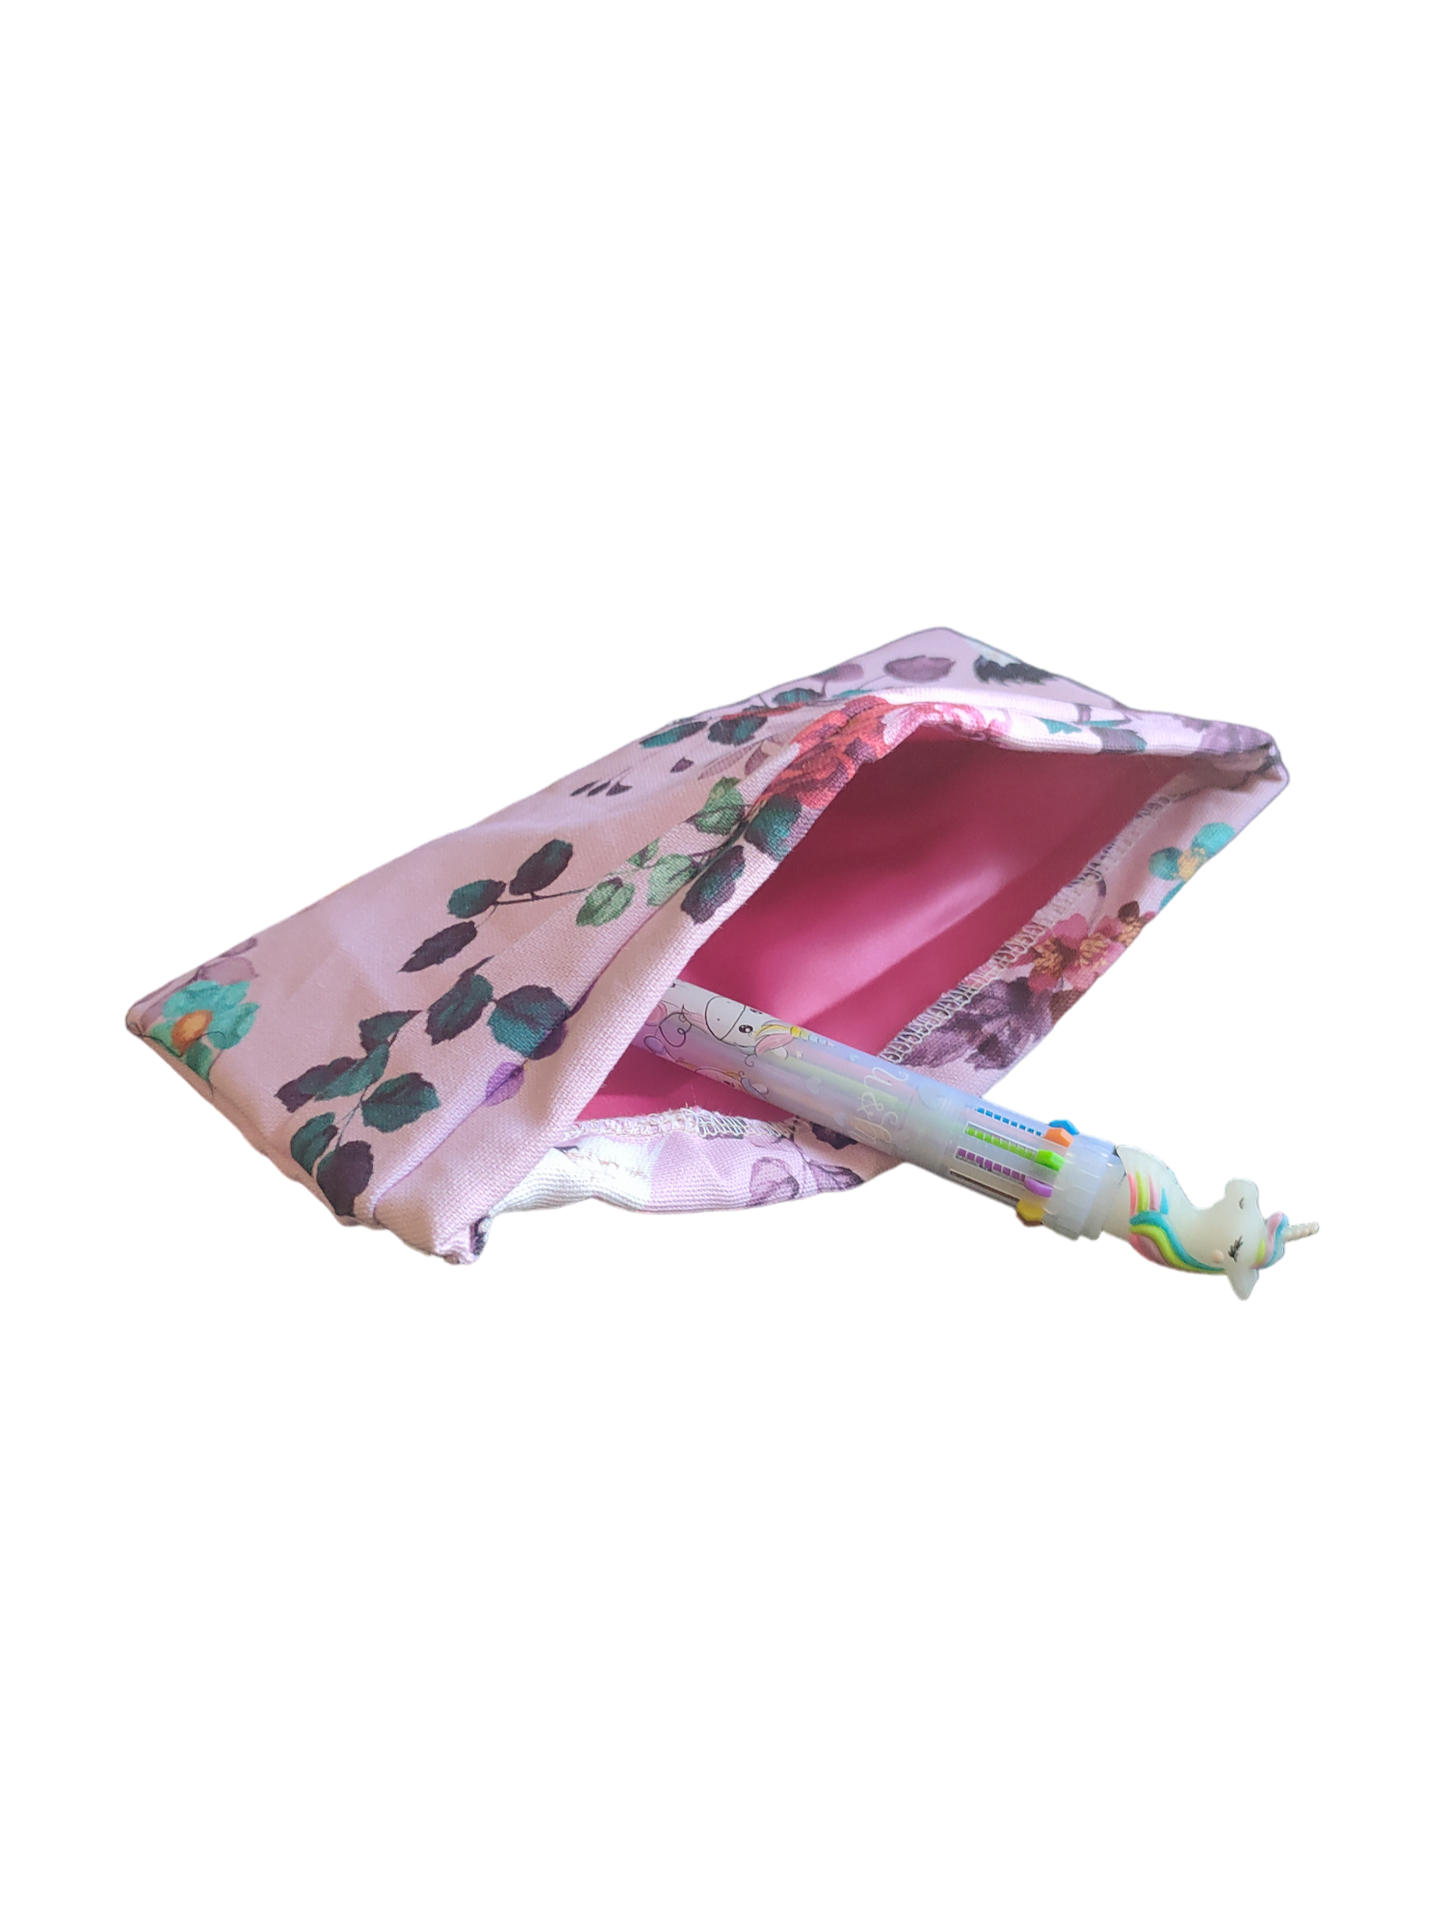 ZIPLESS WIRED STORAGE POUCHES | Pink Floral